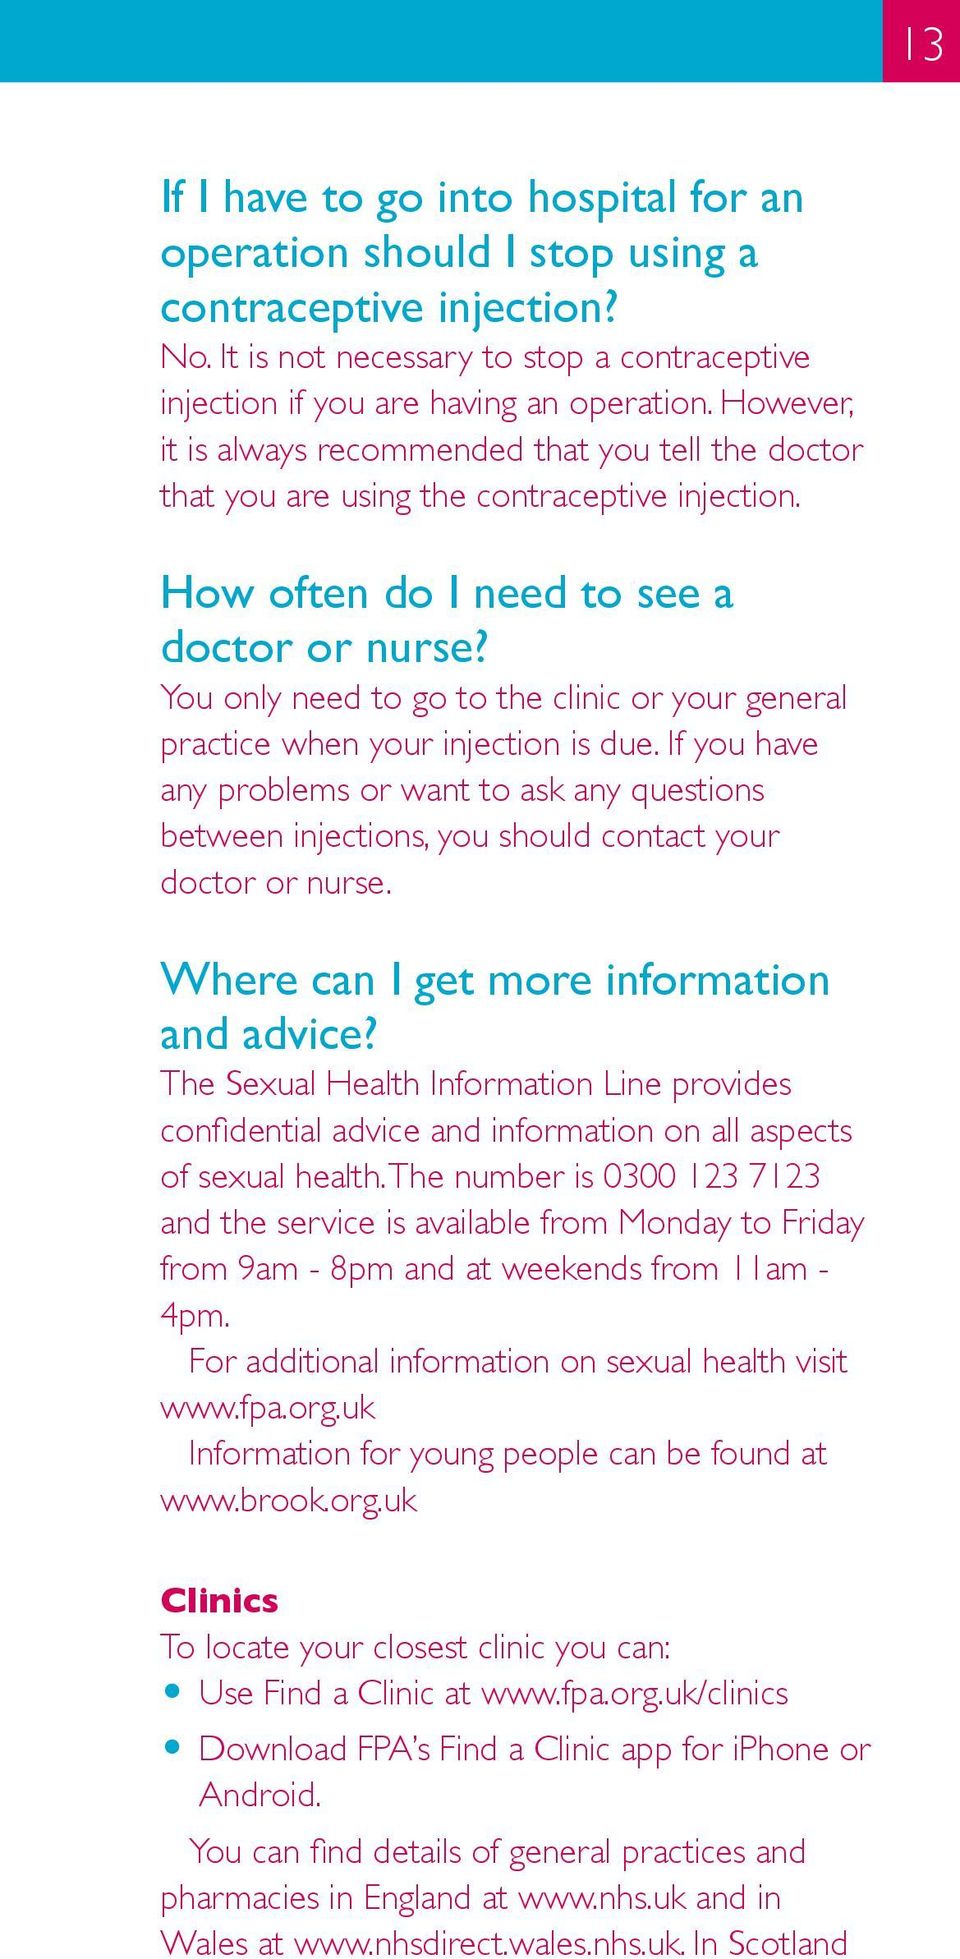 You only need to go to the clinic or your general practice when your injection is due. If you have any problems or want to ask any questions between, you should contact your doctor or nurse.